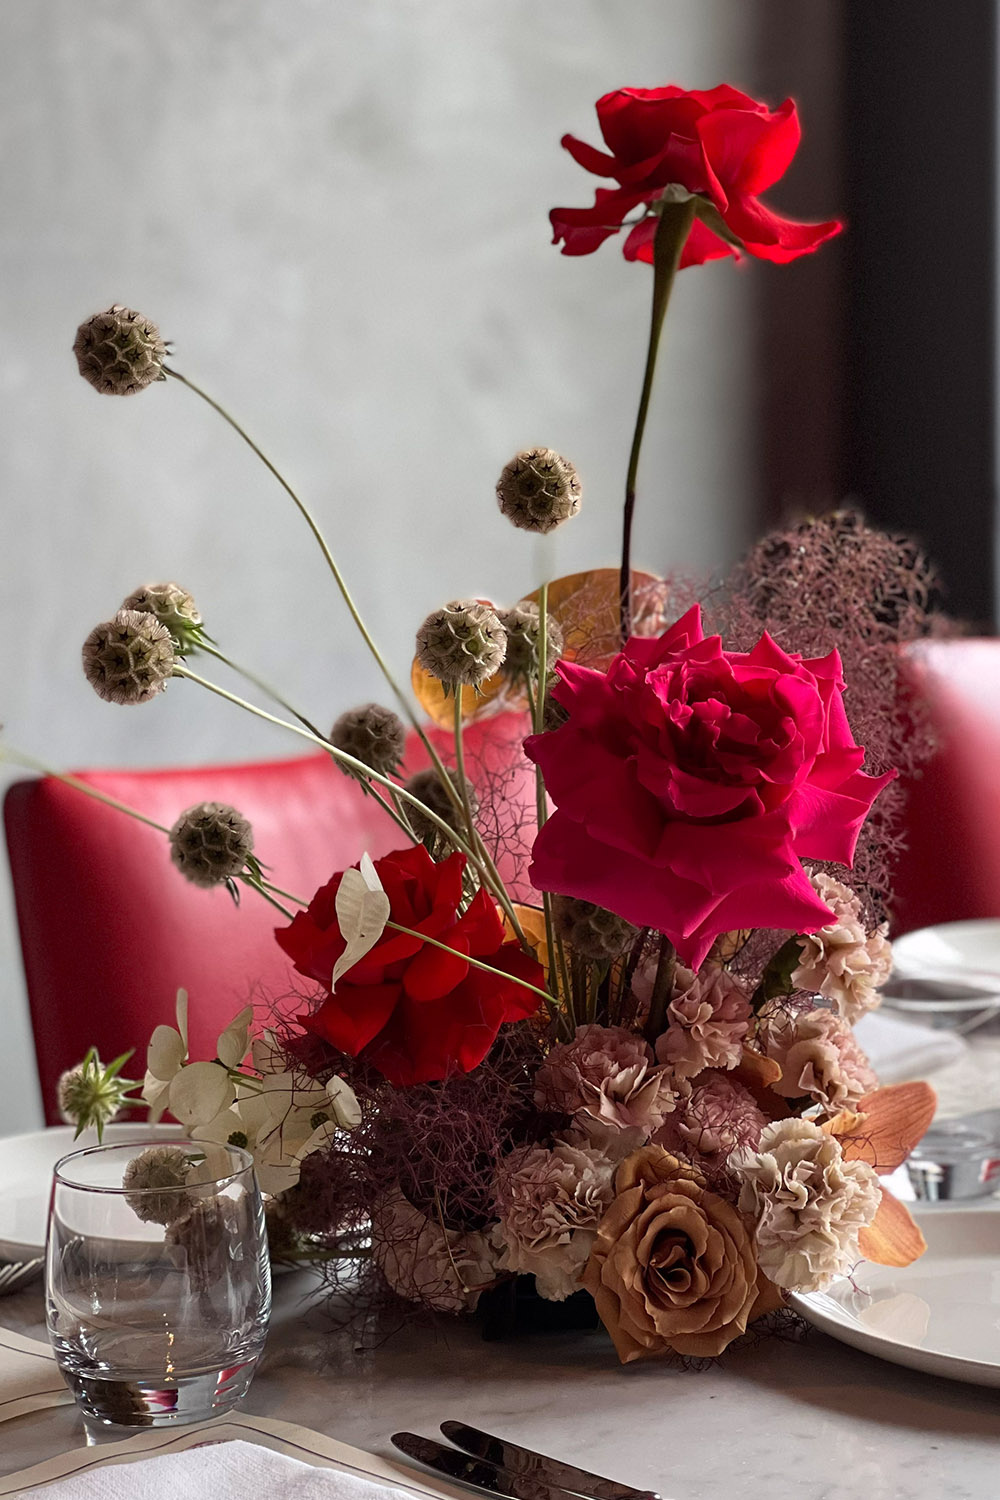 Floral Table Centre Piece with Red Roses